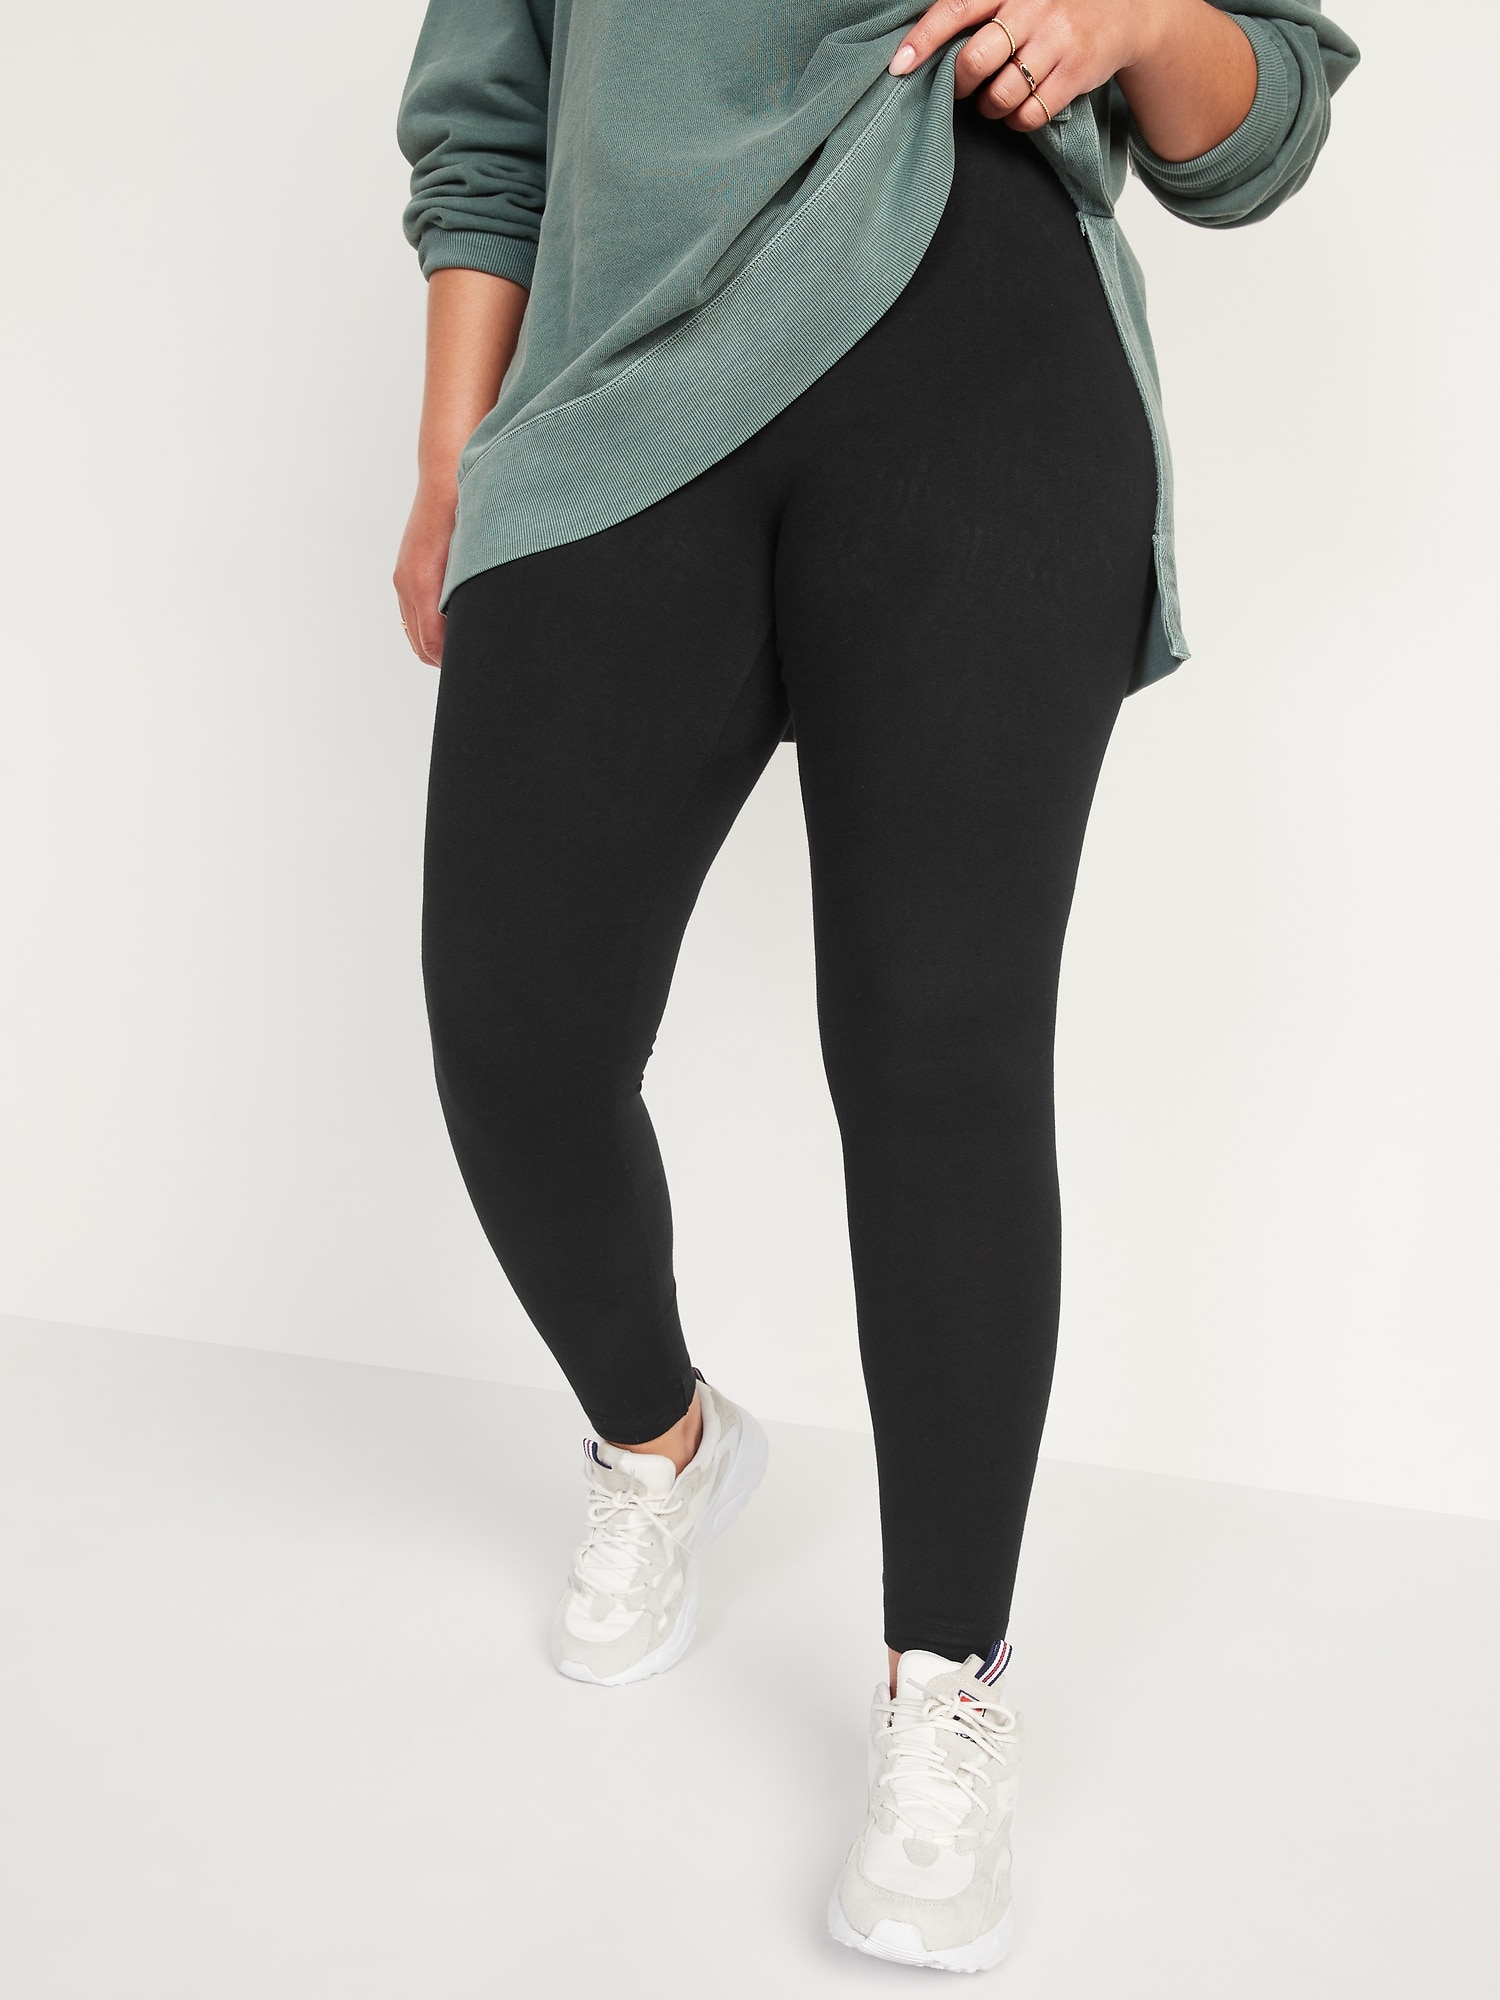 High Waisted Jersey Ankle Leggings For Women Old Navy 8531